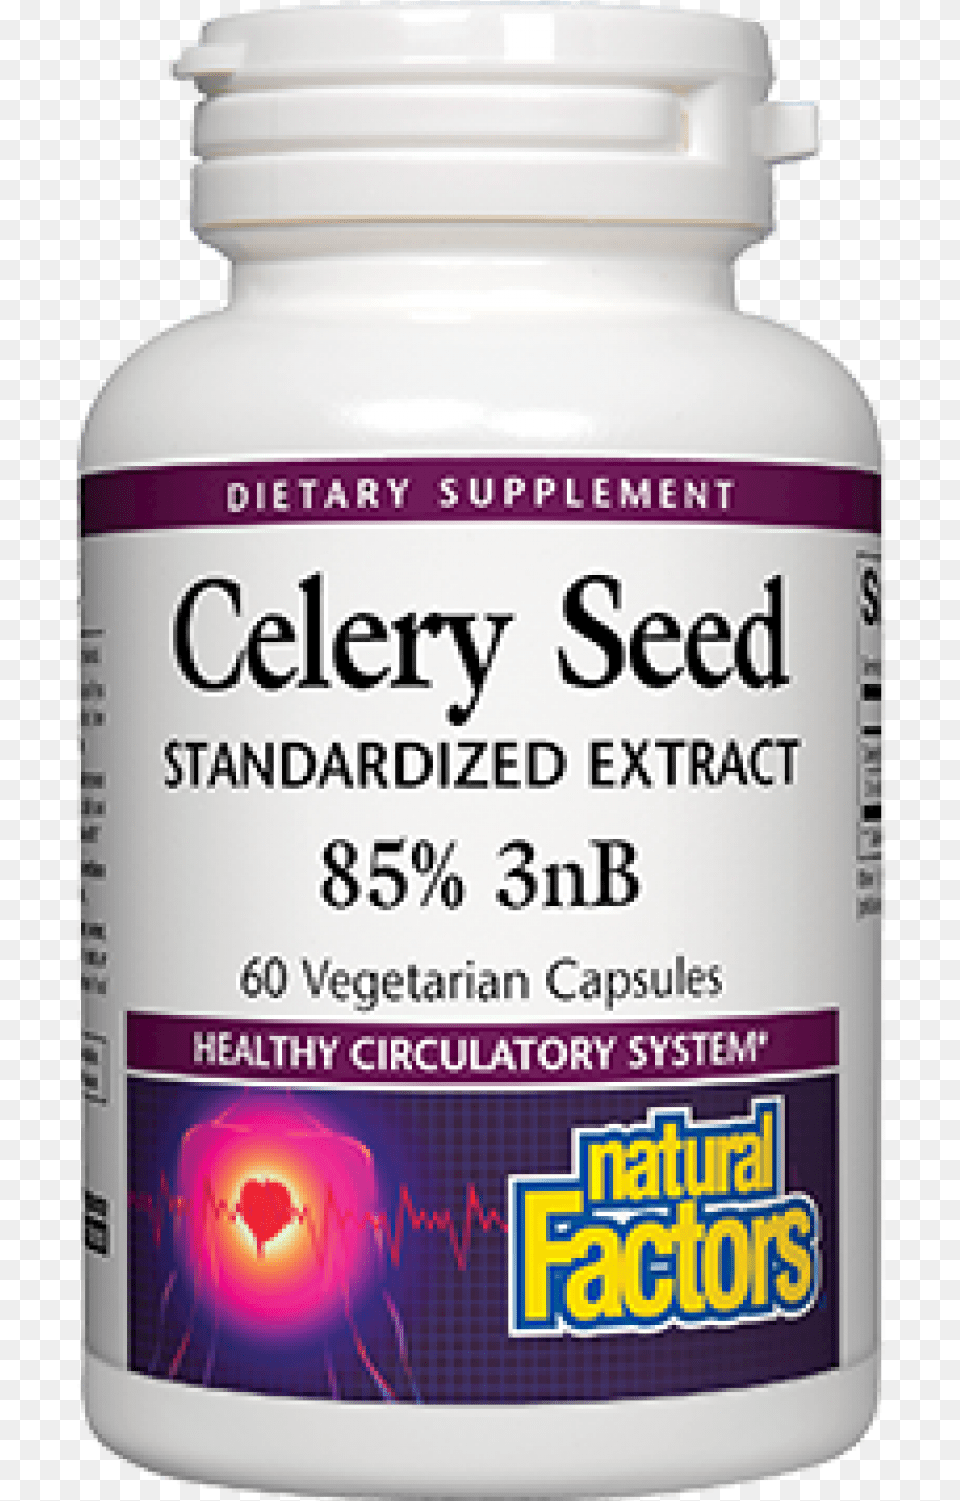 Natural Factors Celery Seed Extract 85 3nb 60 Caps Natural Factors Advanced Cholesterol, Astragalus, Flower, Plant, Mailbox Png Image